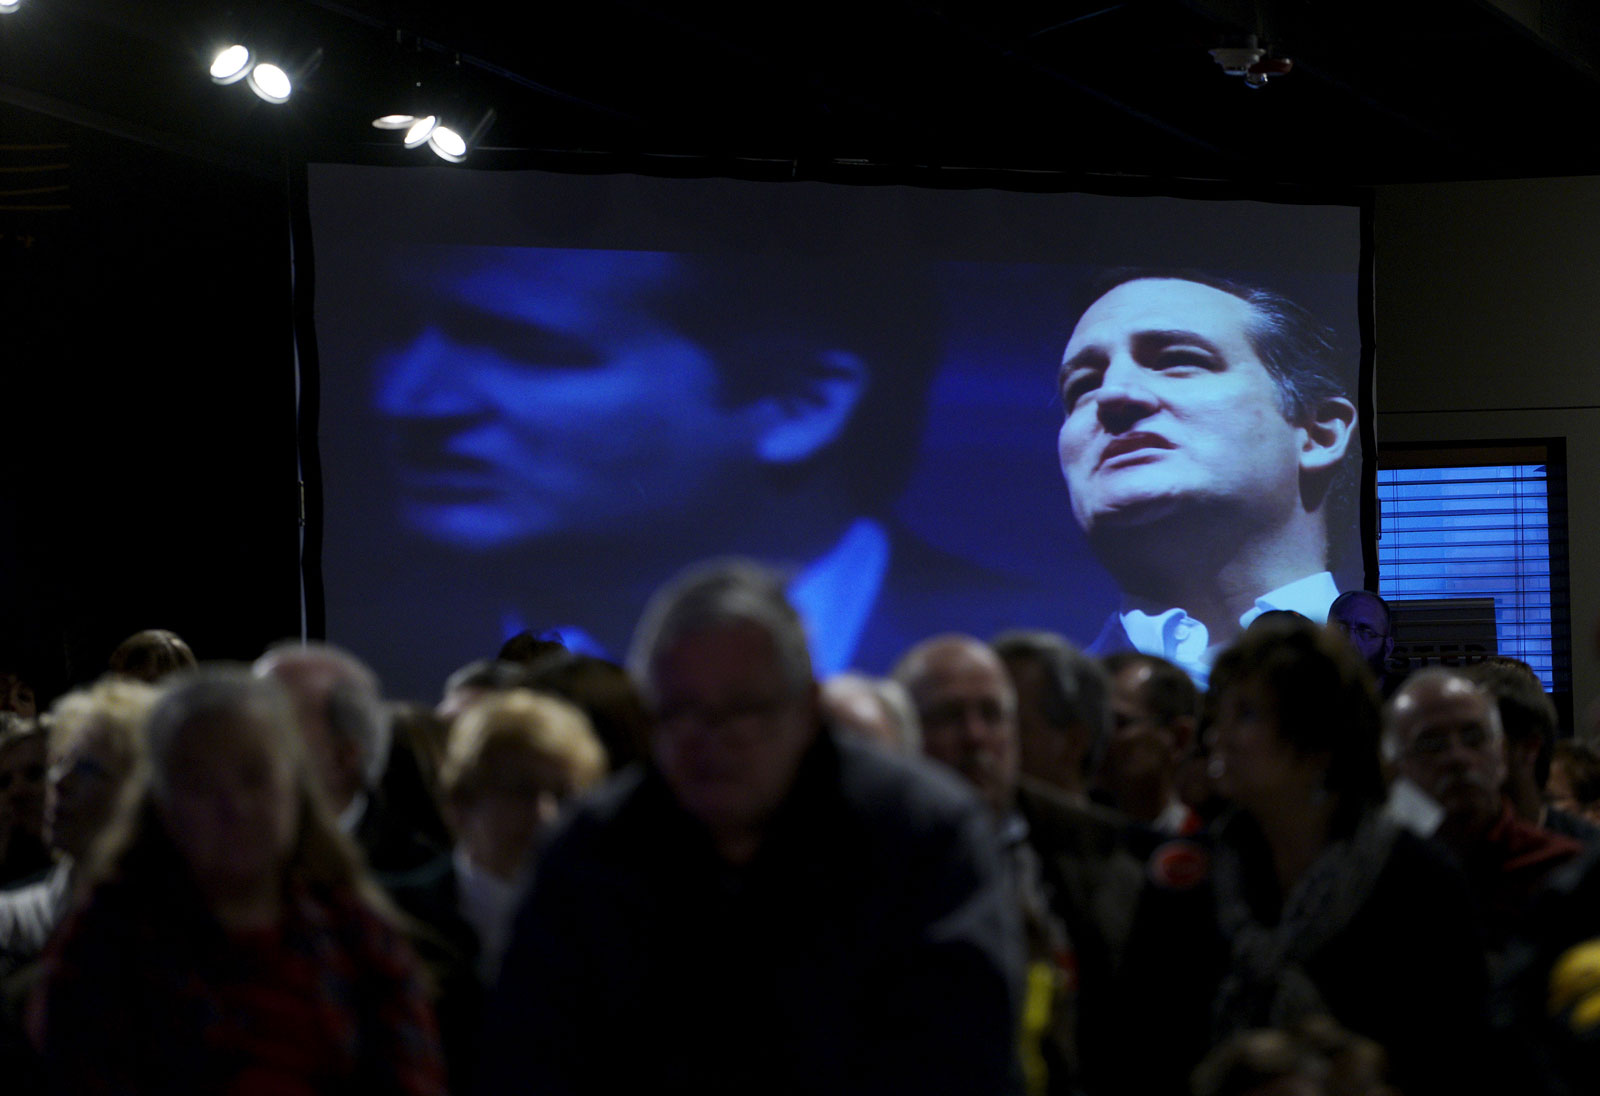 Ted Cruz on video at a campaign event in Davenport, Iowa, January 31, 2016 